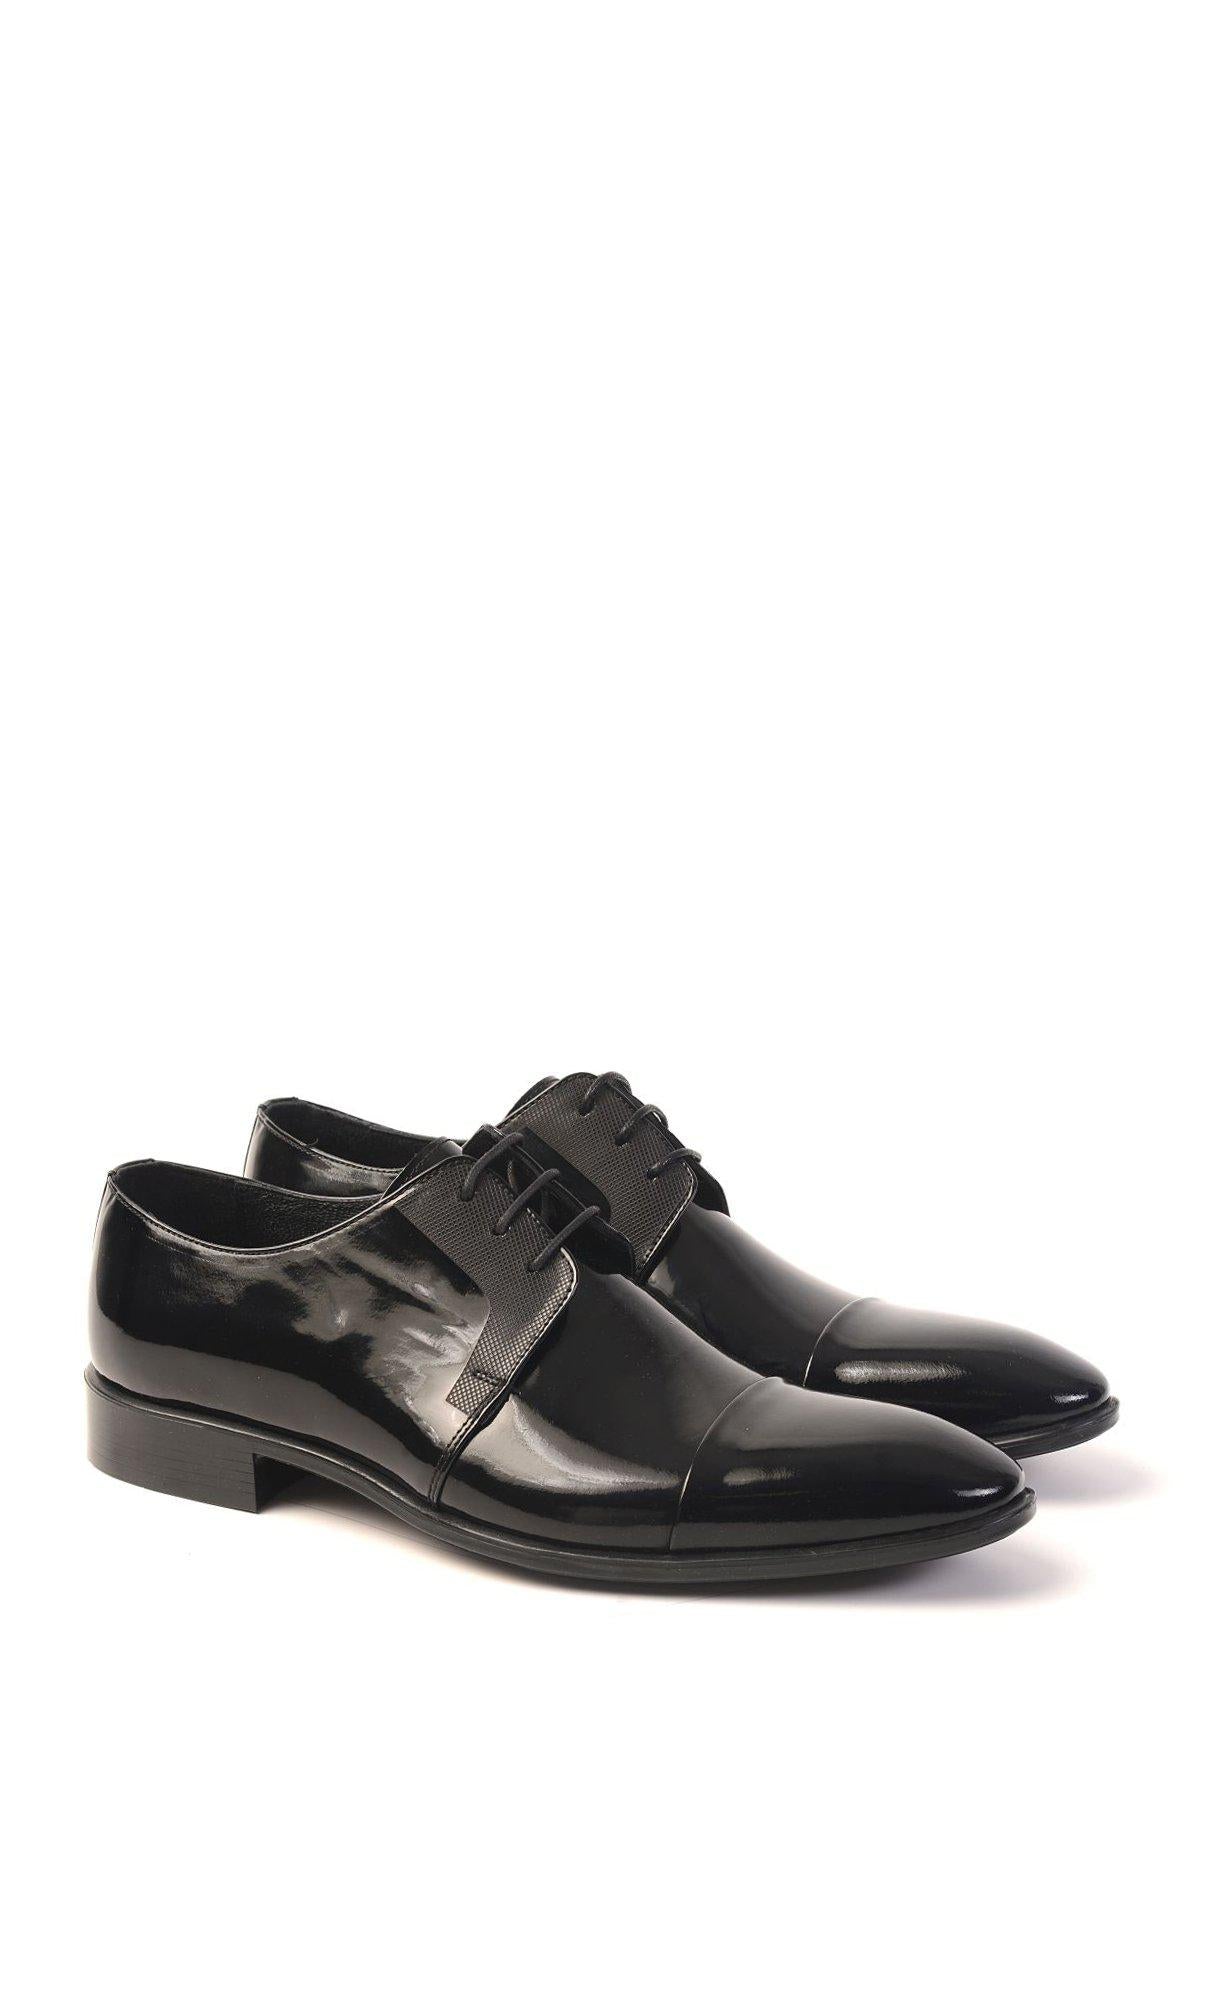 glossy black leather shoes